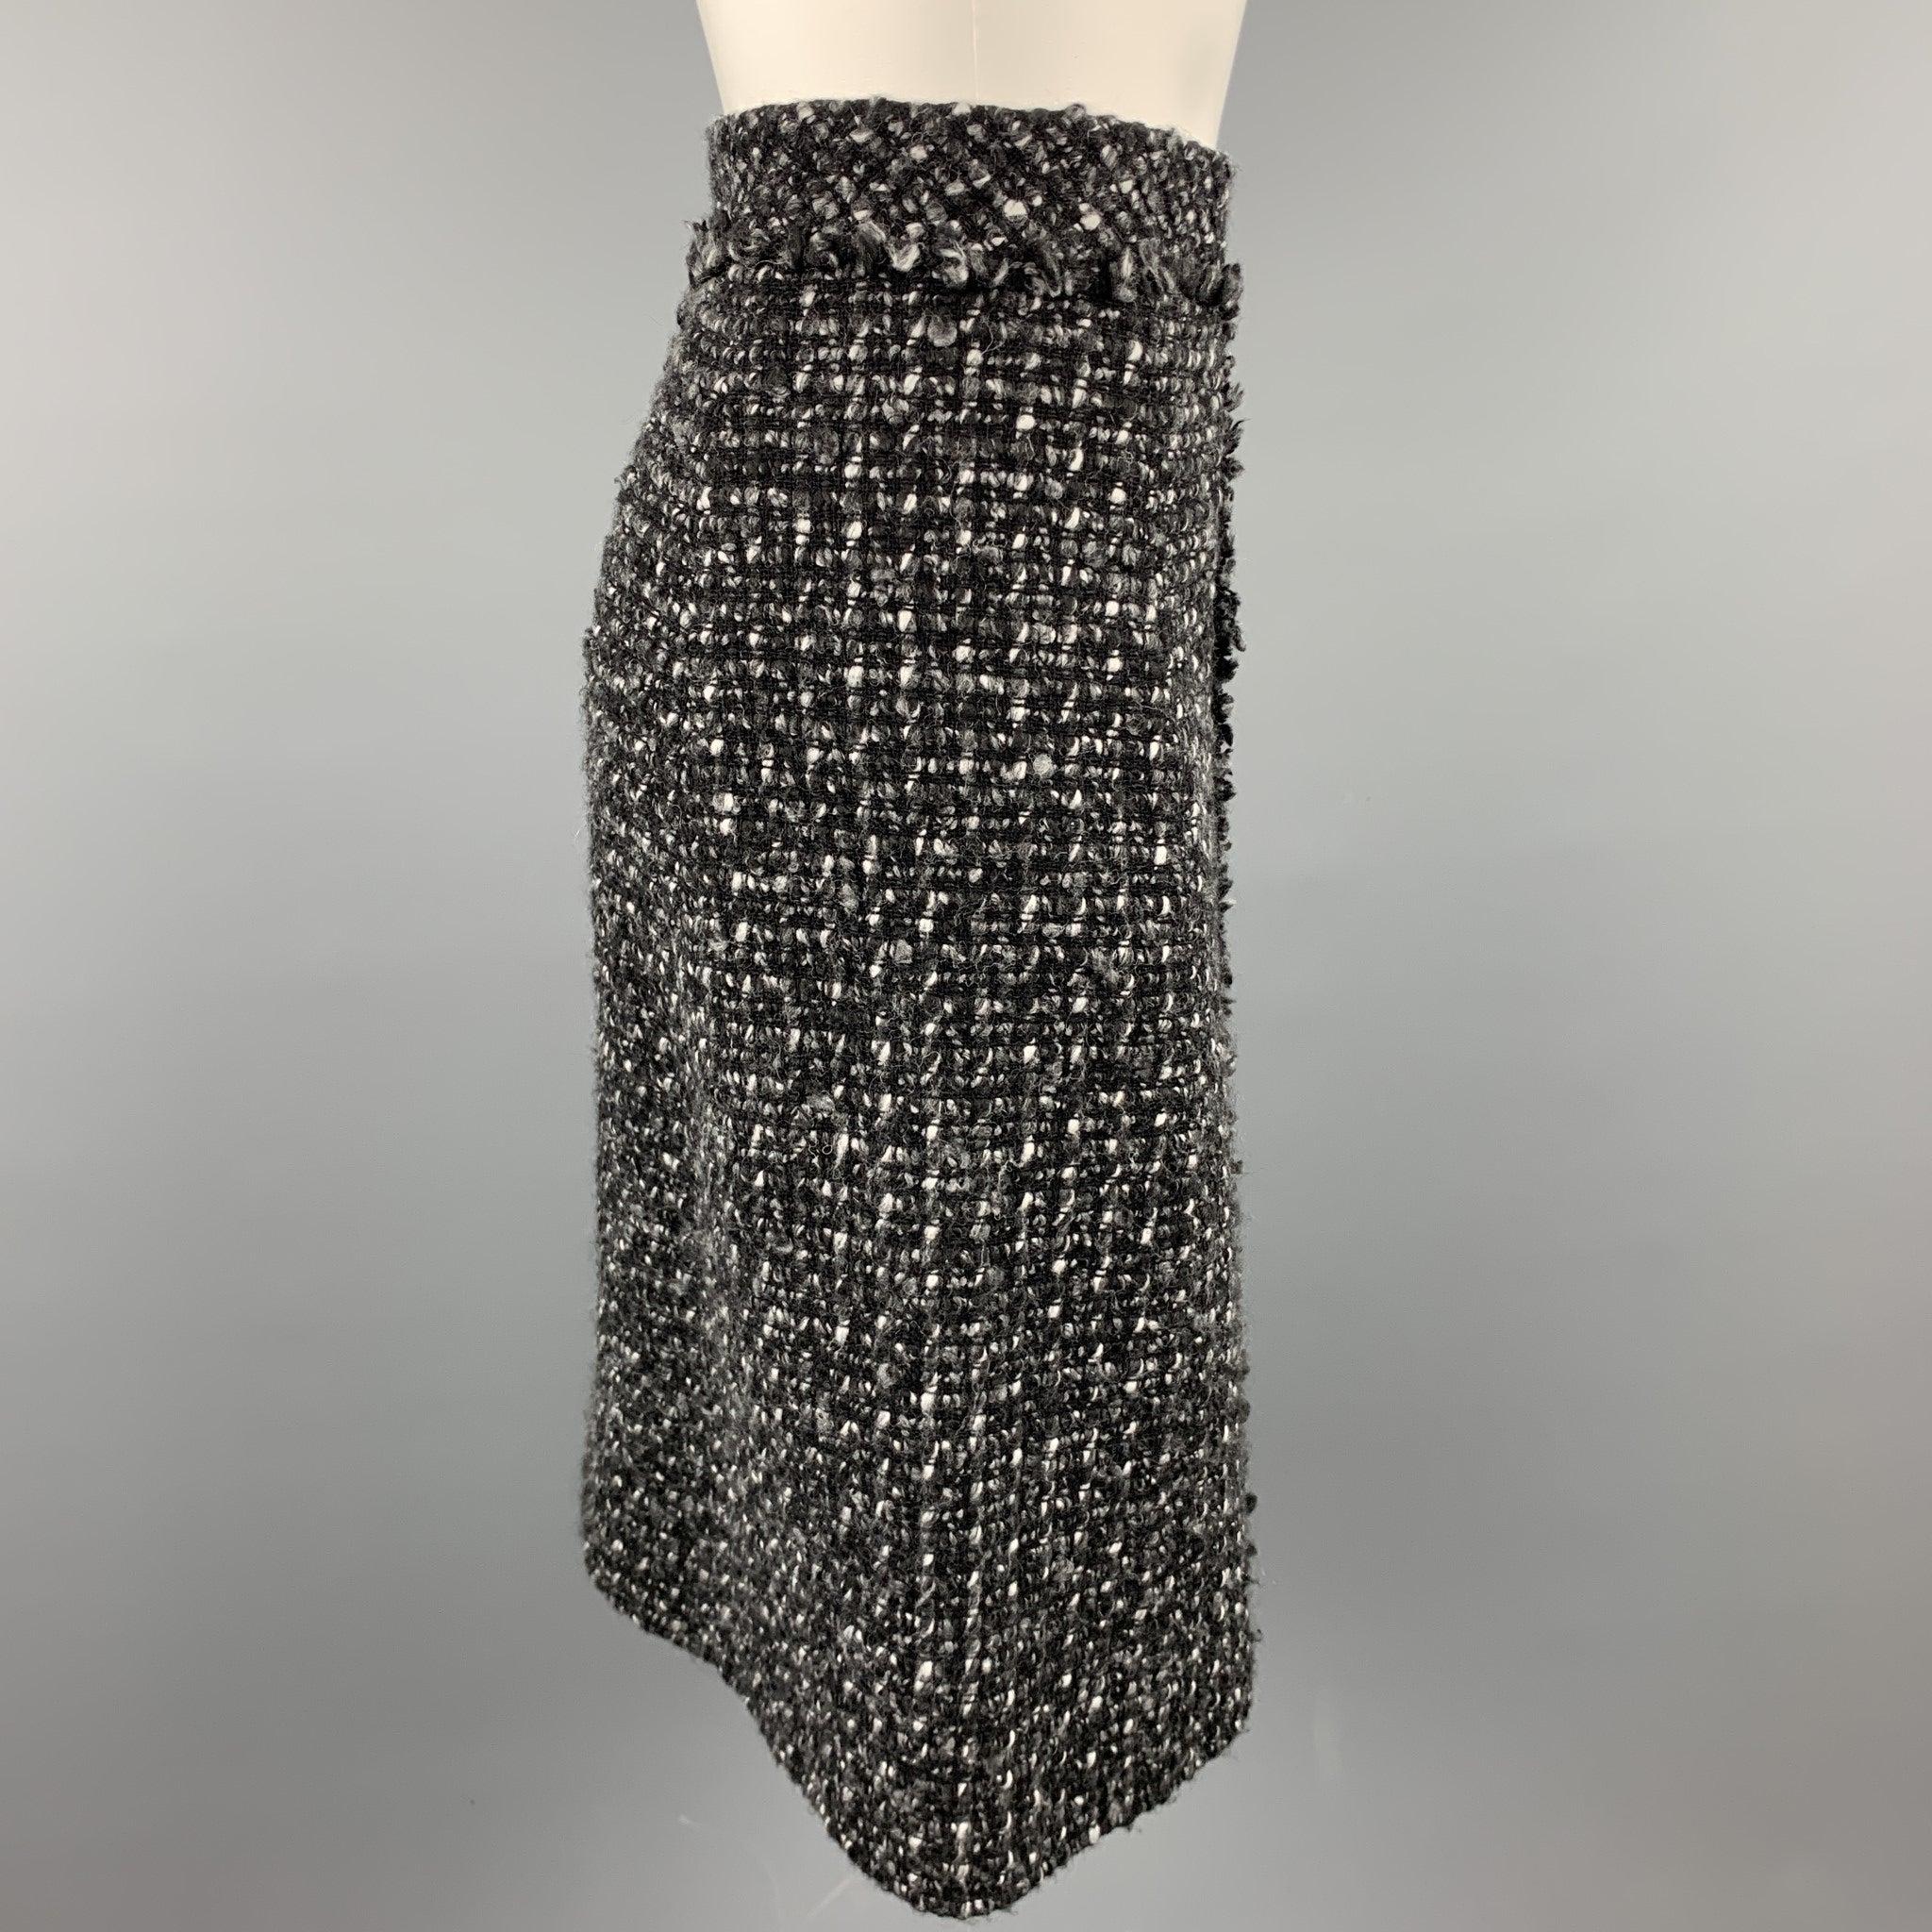 CAROLINA HERRERA skirt comes in a black & grey boucle wool blend with a black liner featuring an a-line style, hook & eye, back zip up closure. Made in Spainches Excellent
Pre-Owned Condition. 

Marked:   4 

Measurements: 
  Waist: 28 inches 
Hip: